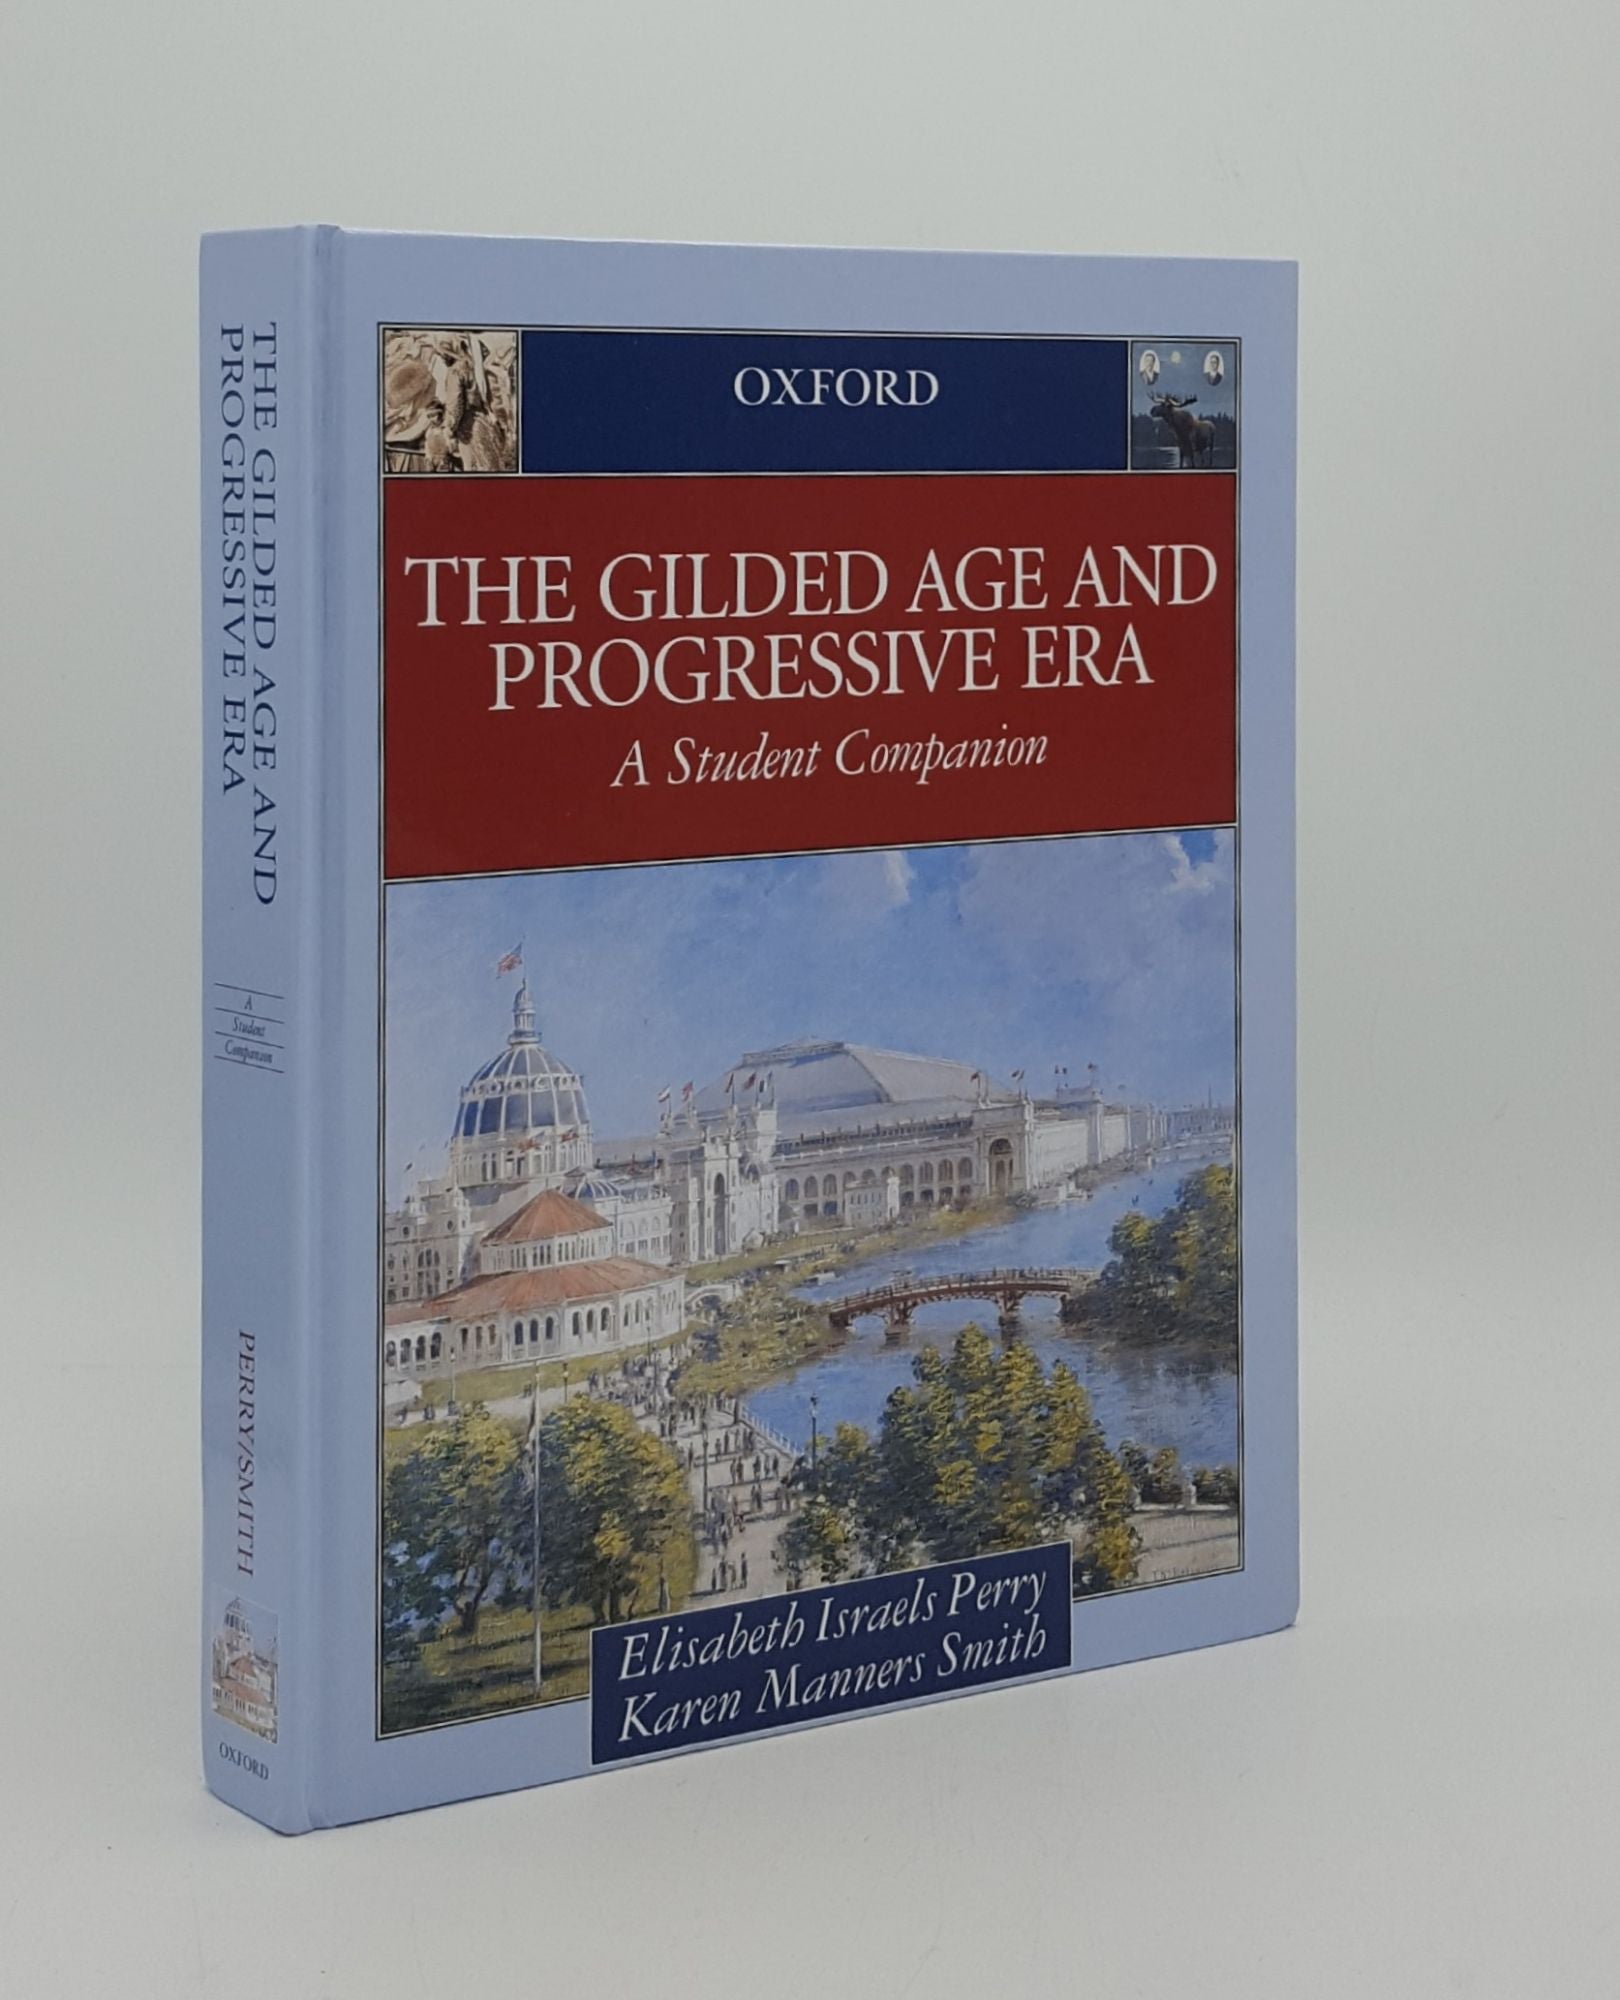 PERRY Elisabeth Israels, SMITH Karen Manners - The Gilded Age and Progressive Era a Student Companion